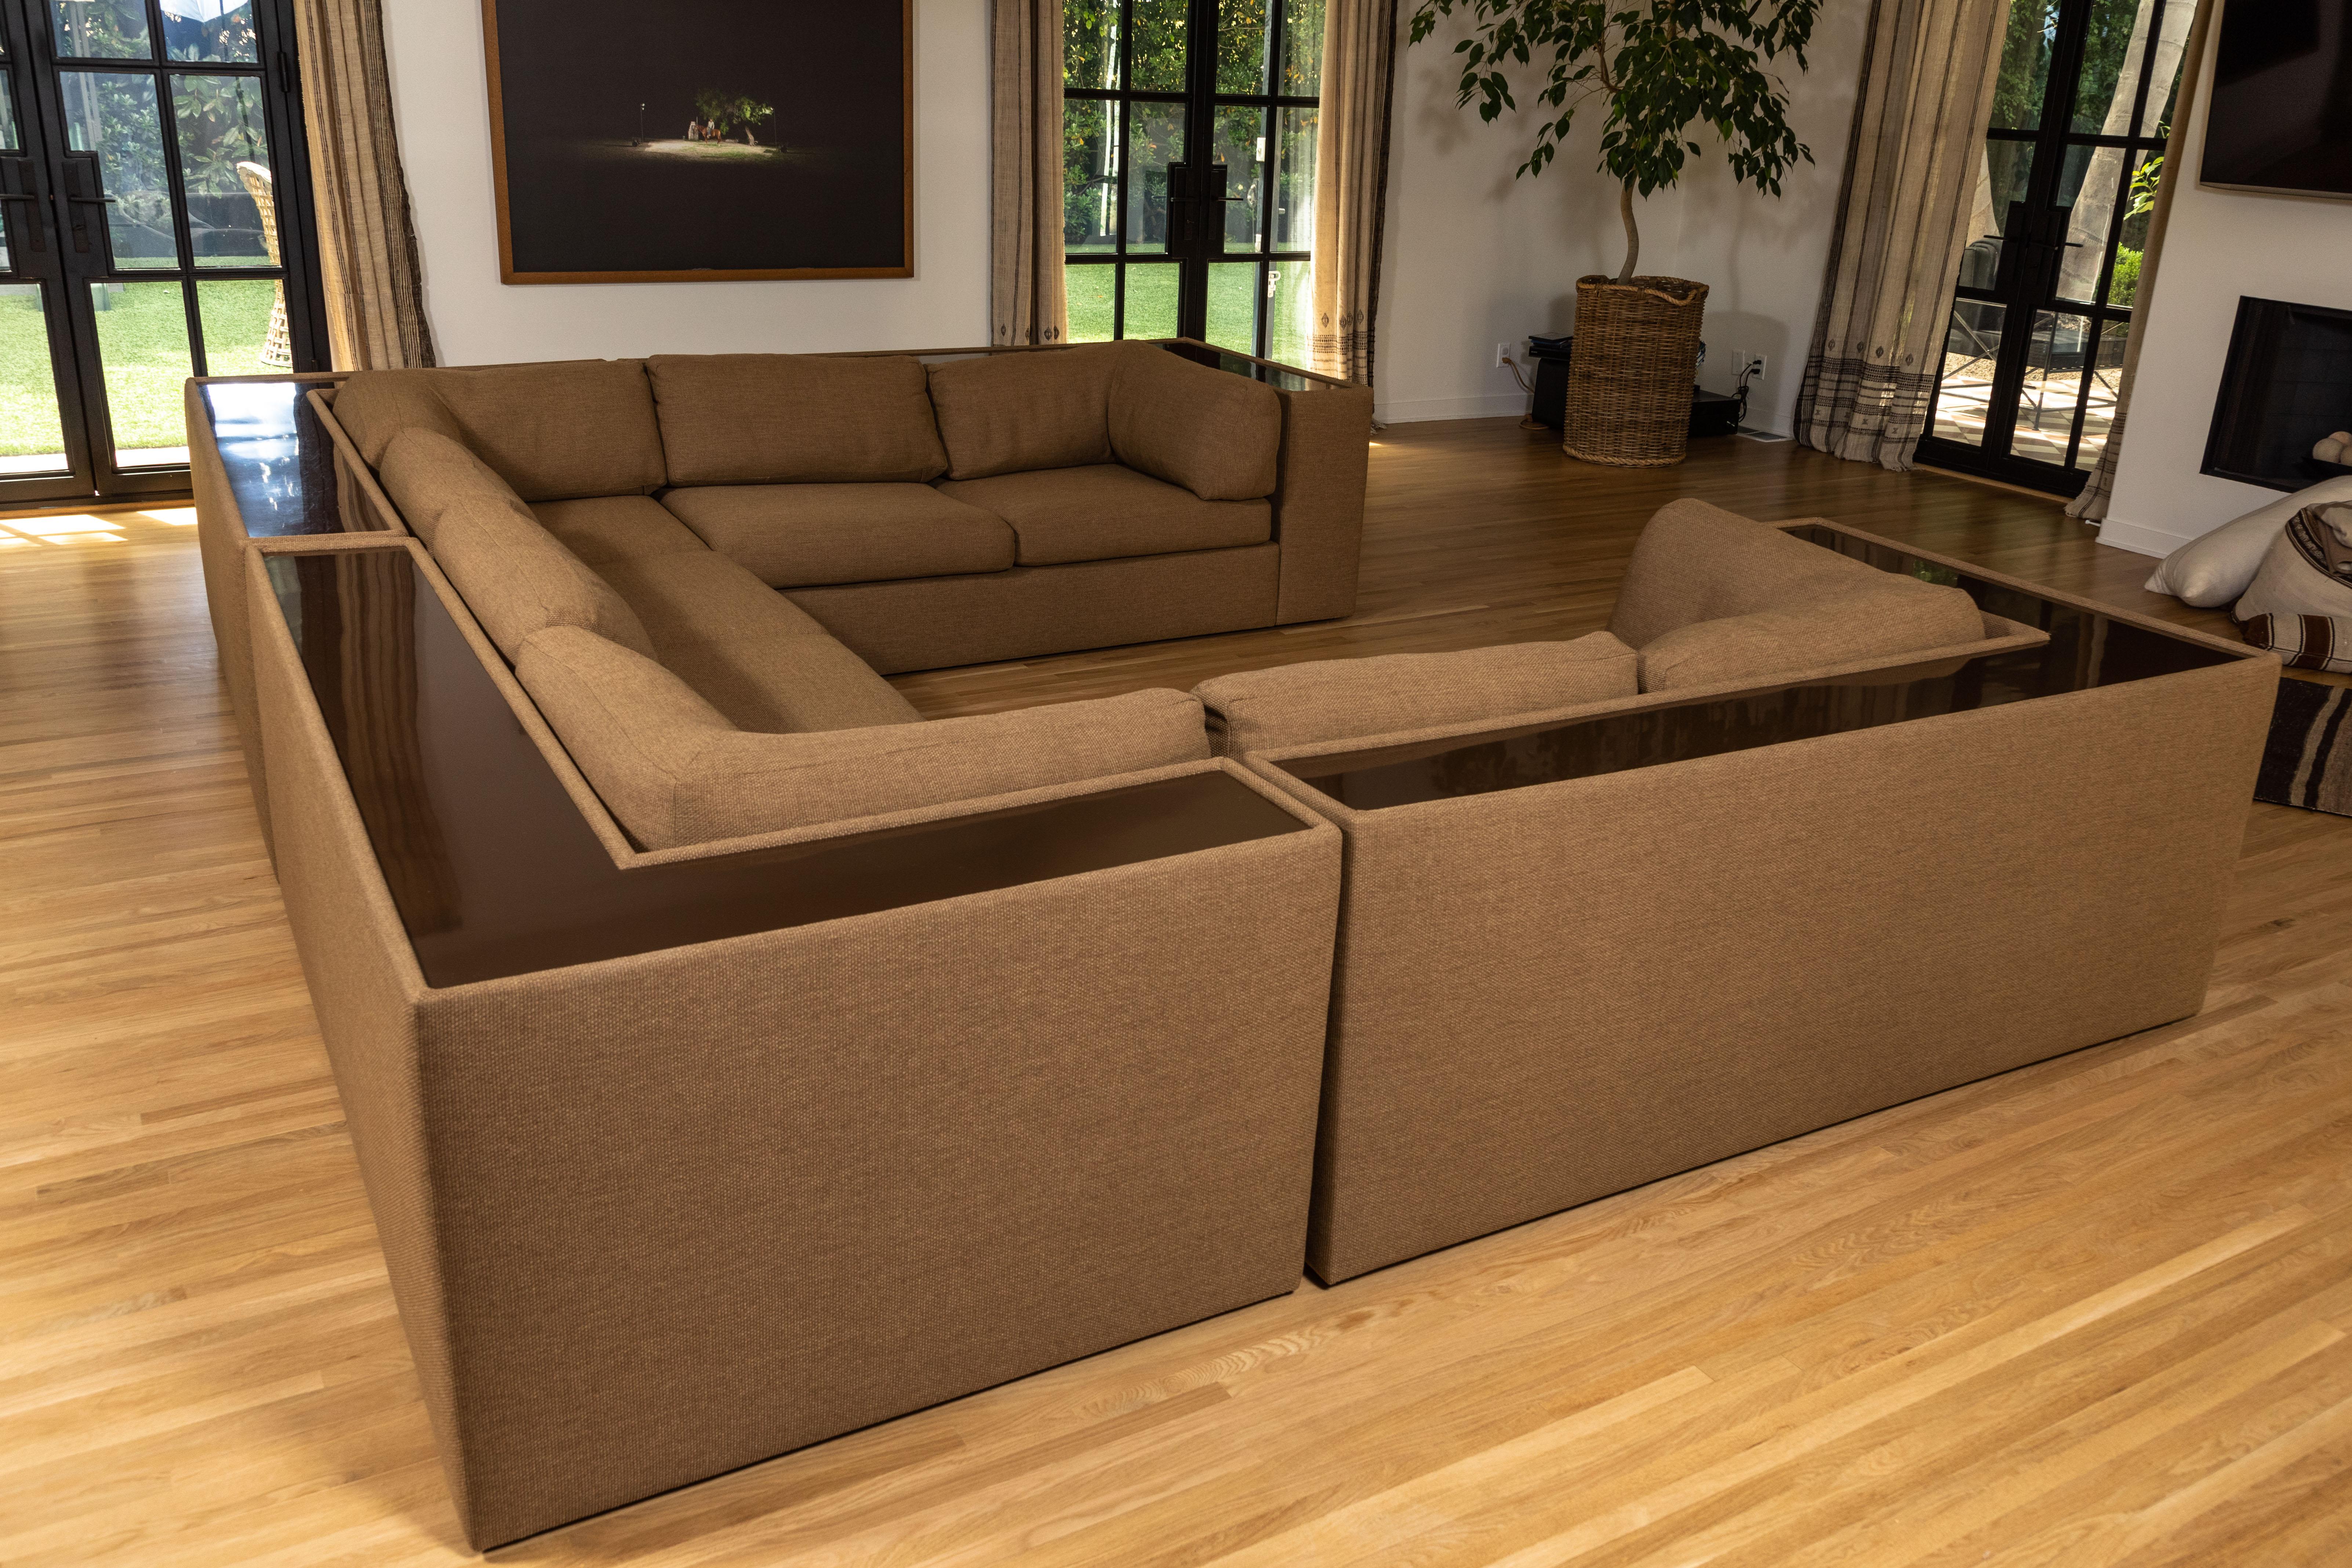 Magnificent Milo Baughman sectional sofa, newly upholstered in Kravet performance fabric. Four pieces offer options for configuration. Brown continuous original polymer shelf at back highlights the neutral textured upholstery. Measurements are for